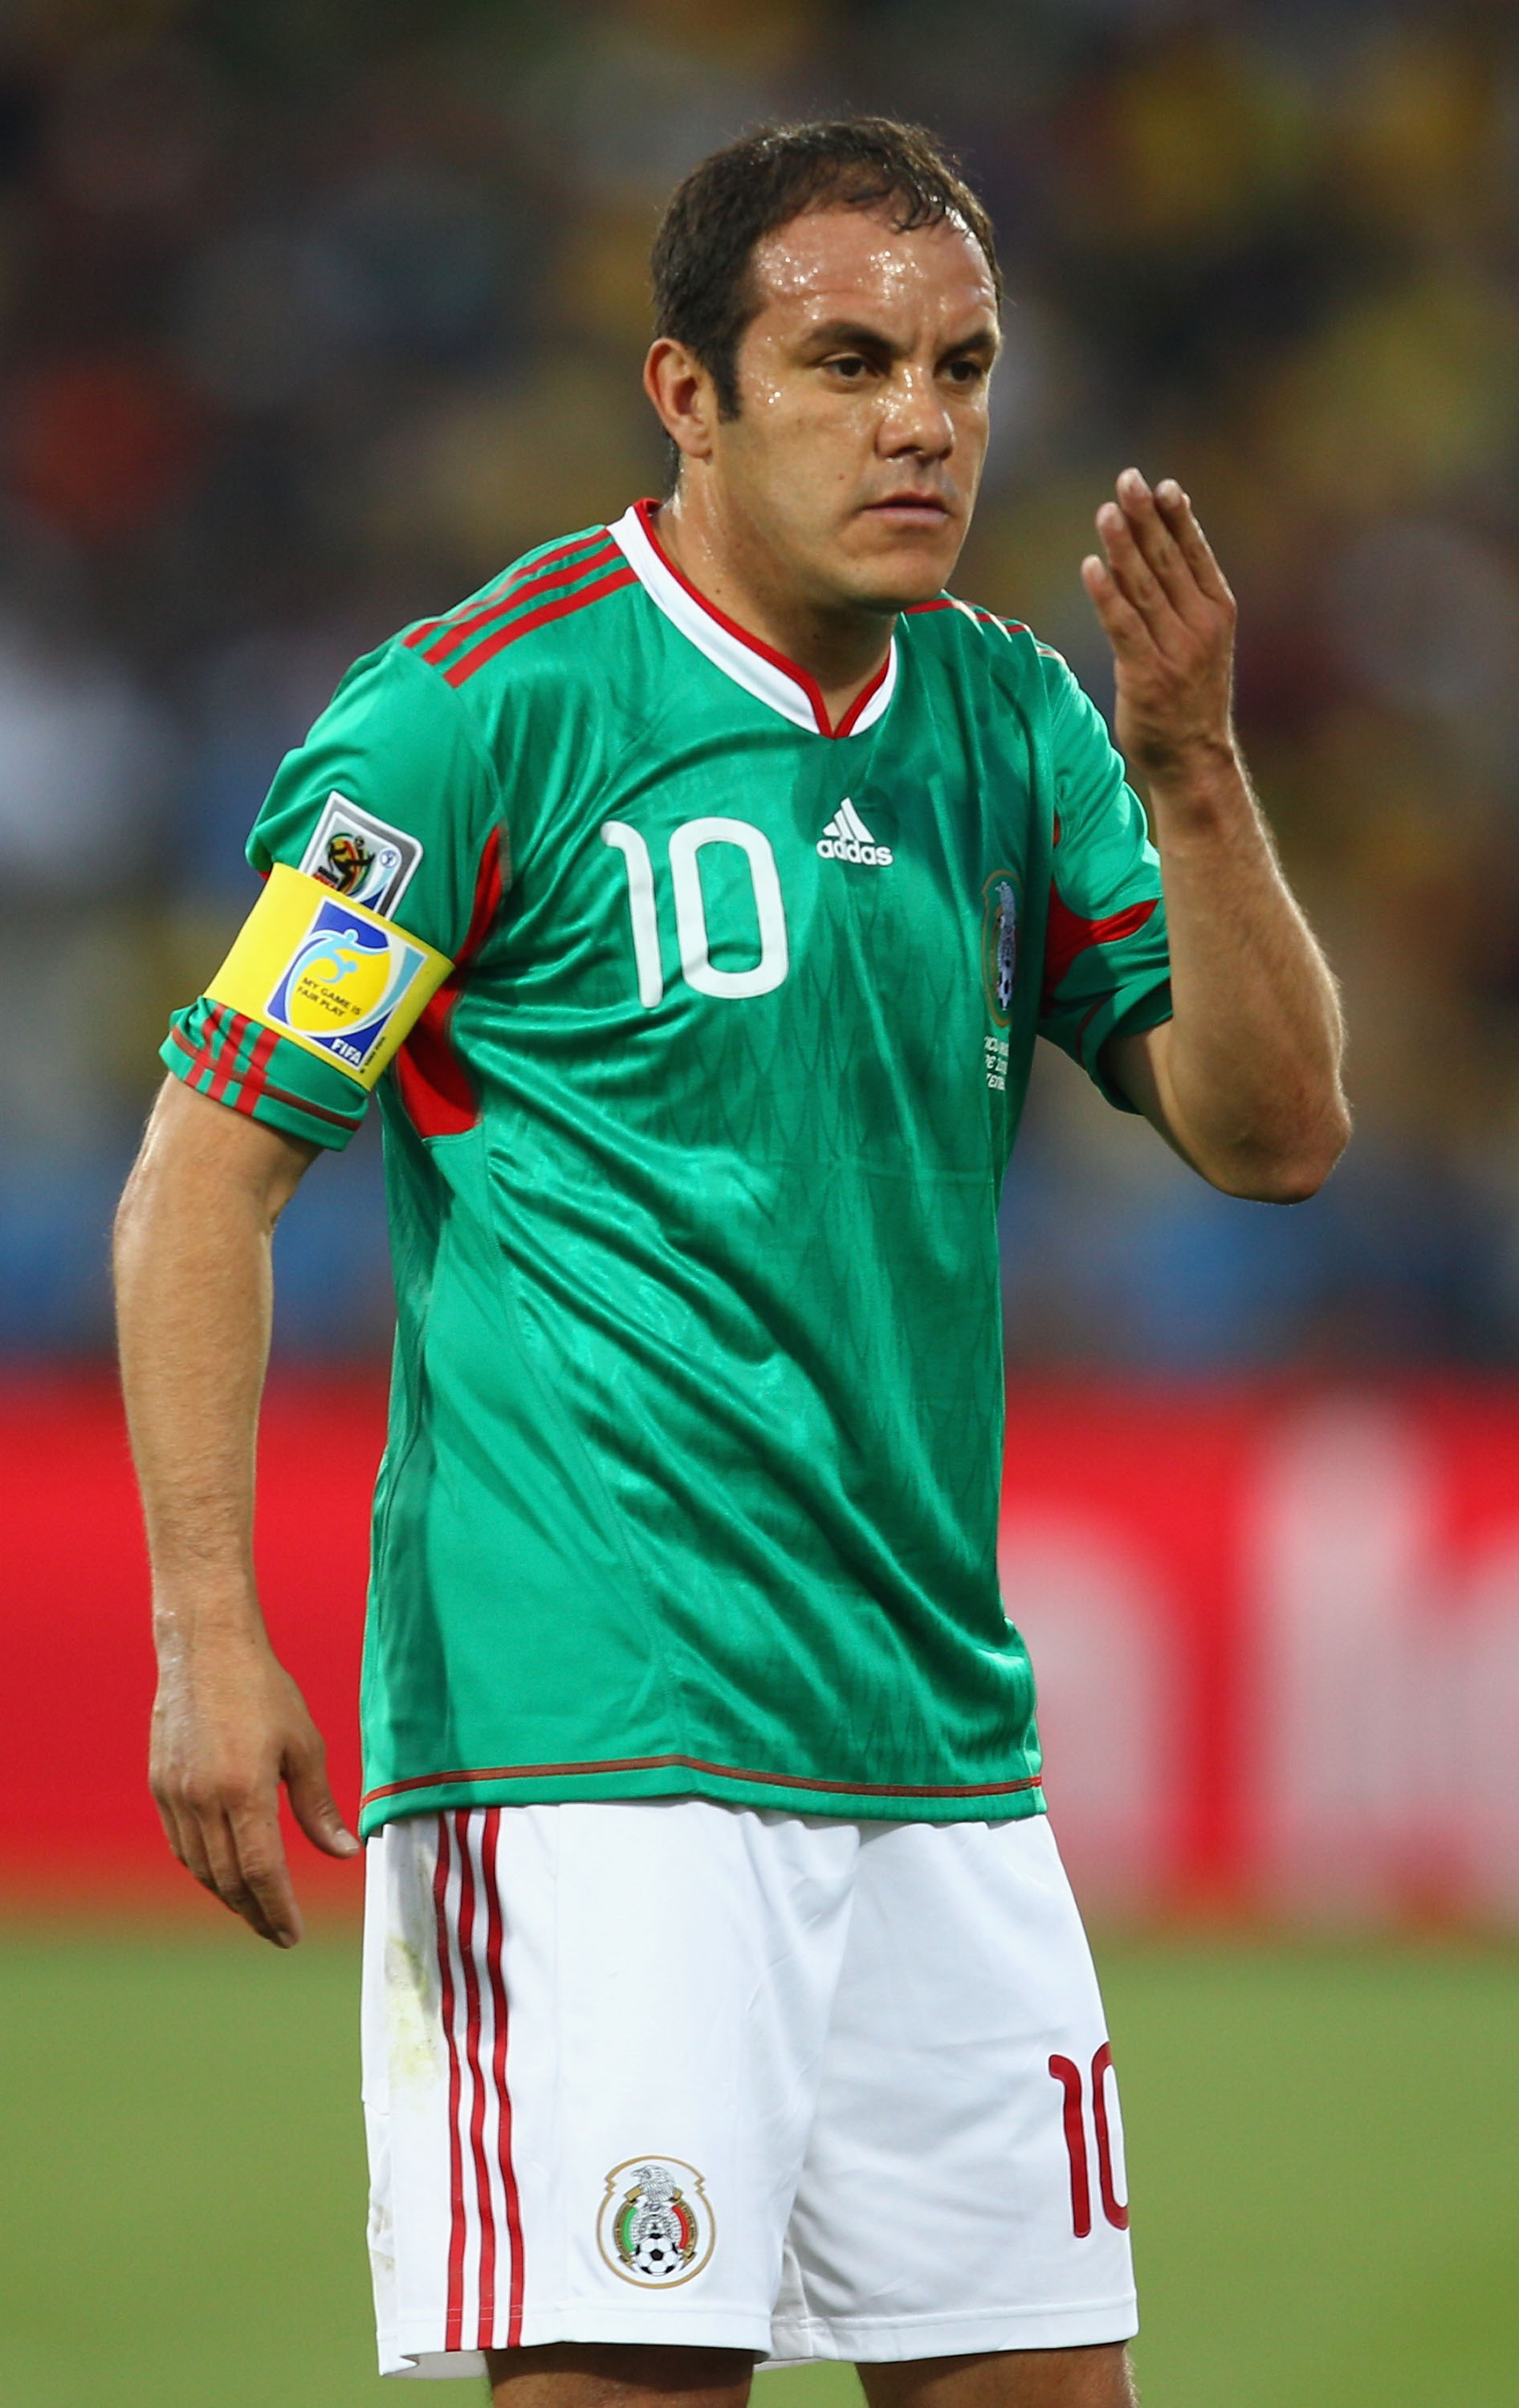 RUSTENBURG, SOUTH AFRICA - JUNE 22:  Cuauhtemoc Blanco of Mexico reacts during the 2010 FIFA World Cup South Africa Group A match between Mexico and Uruguay at the Royal Bafokeng Stadium on June 22, 2010 in Rustenburg, South Africa.  (Photo by Richard Hea